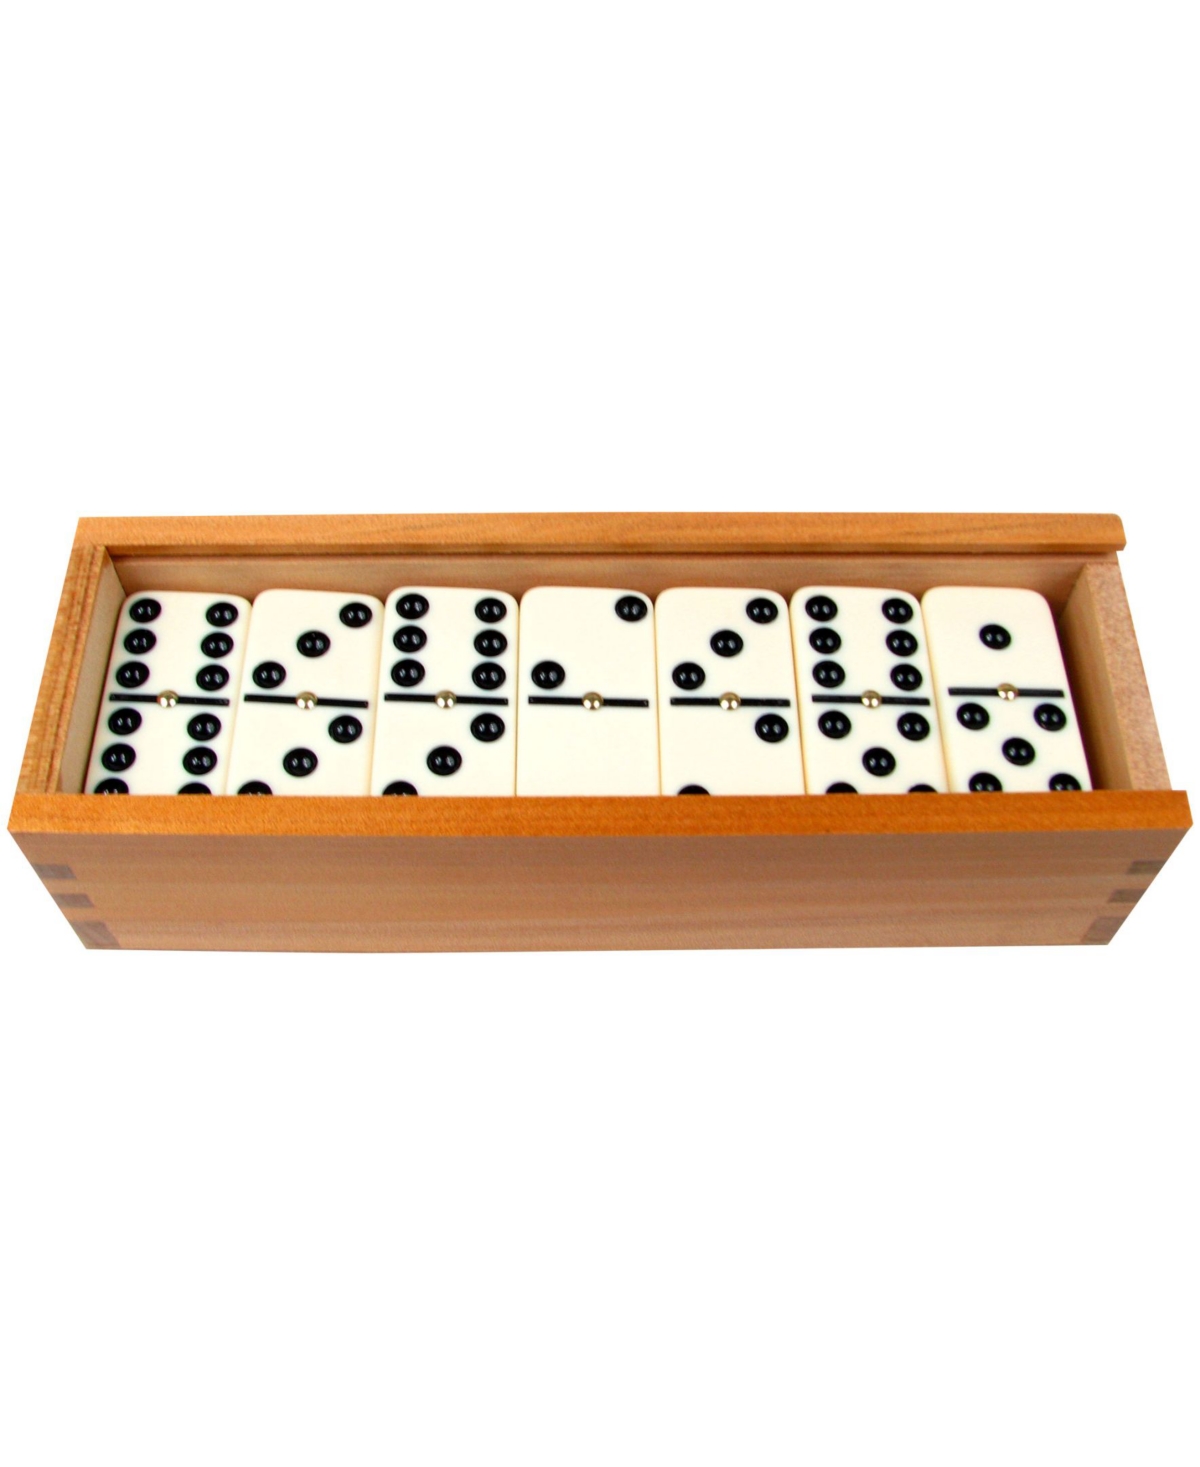 Shop Trademark Global Hey Play Premium Set Of 28 Double Six Dominoes Wood Case In White